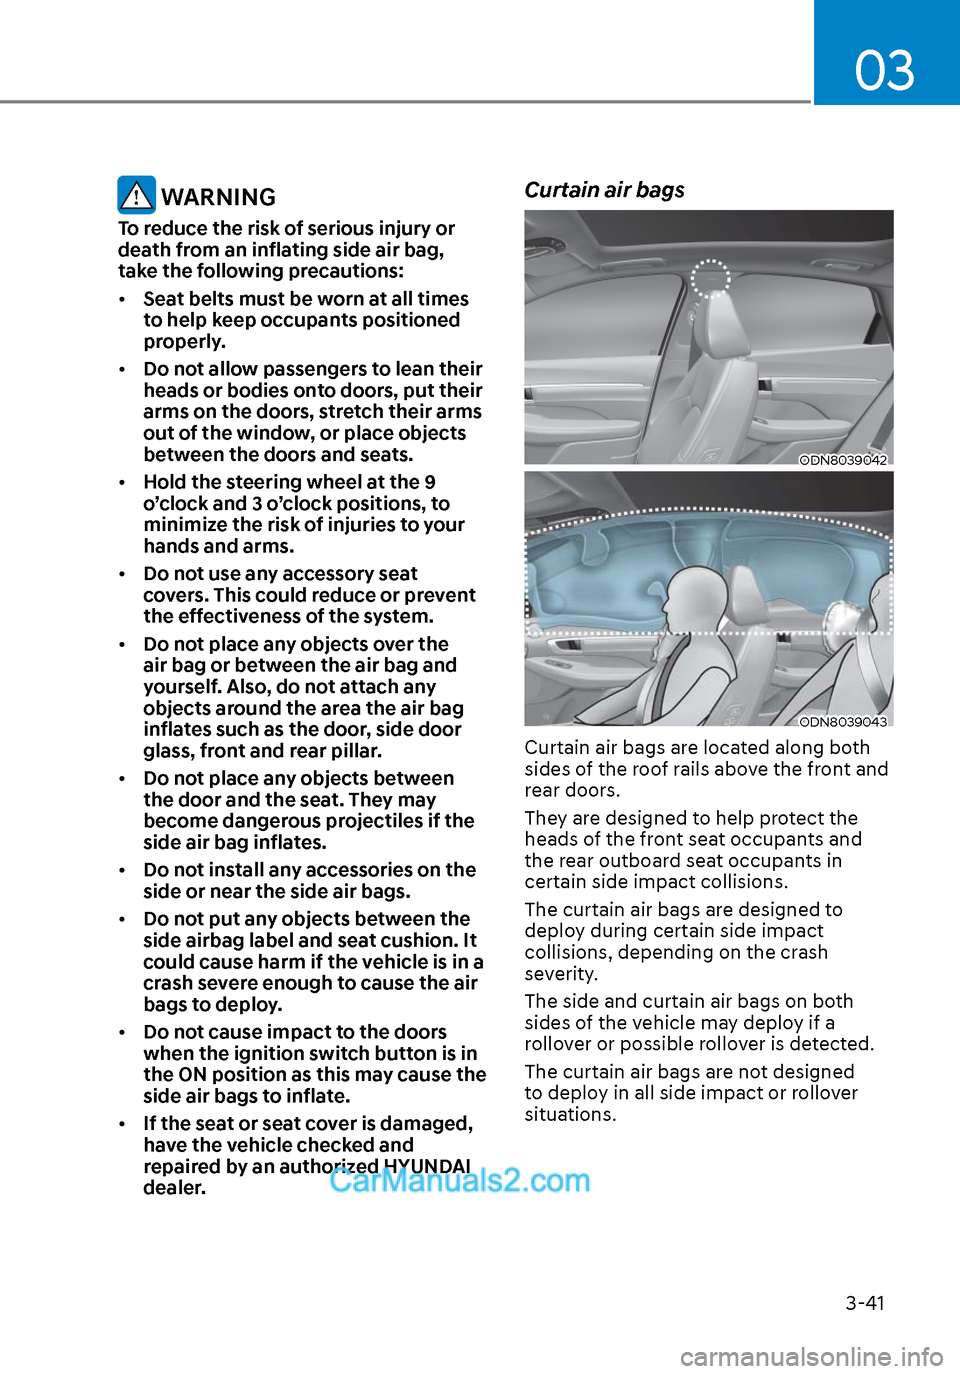 Hyundai Sonata 2020  Owners Manual 03
3-41
 WARNING
To reduce the risk of serious injury or 
death from an inflating side air bag, 
take the following precautions:
• Seat belts must be worn at all times 
to help keep occupants positi